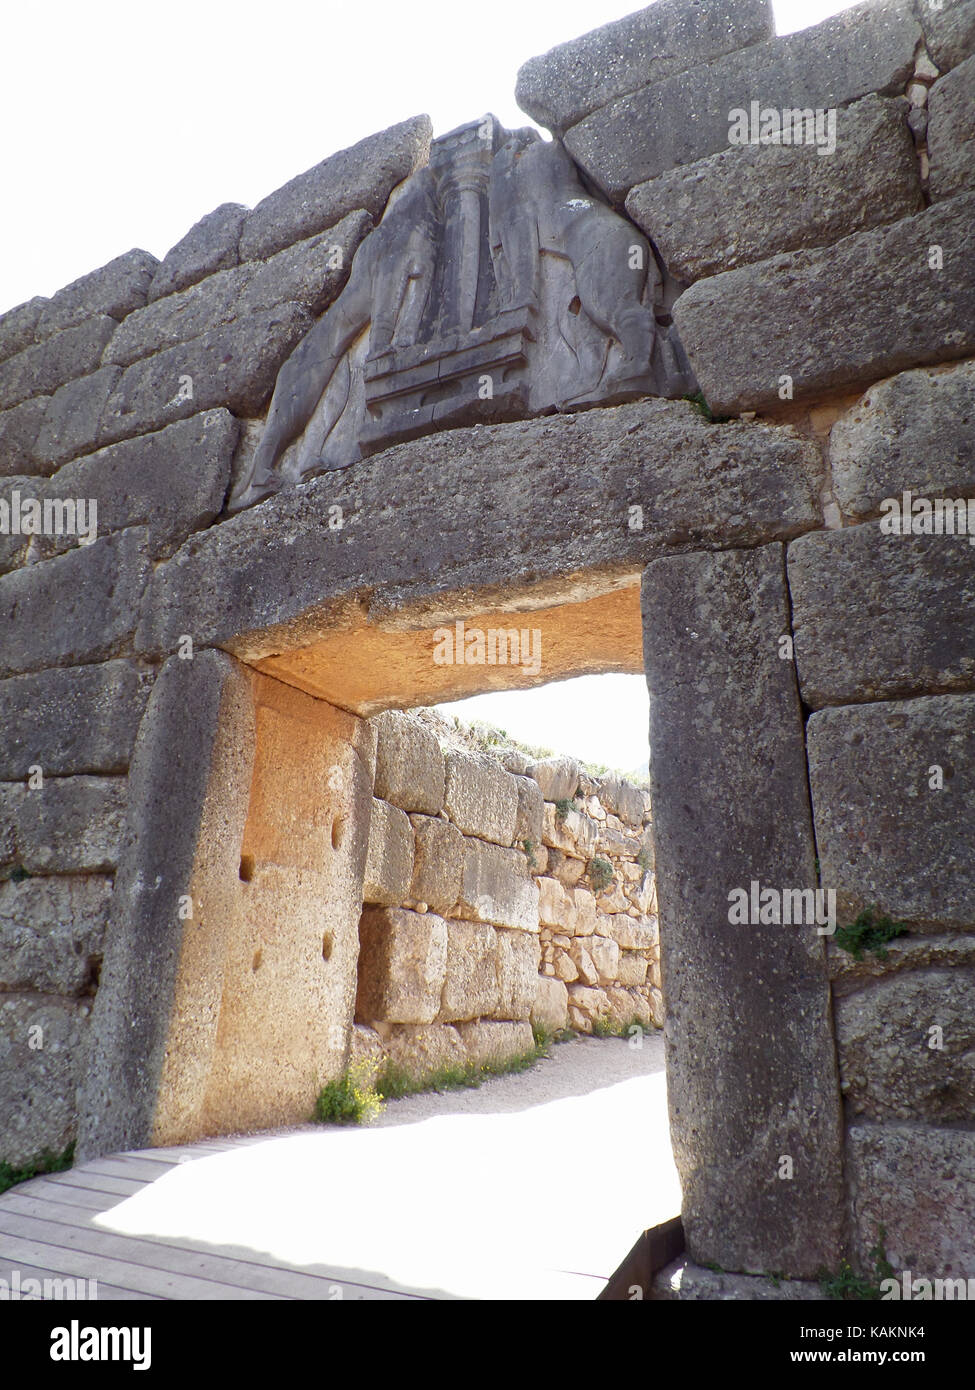 The Lion's Gate at the Archaeological Site of Mycenae, Peloponnese Peninsula of Greece Stock Photo